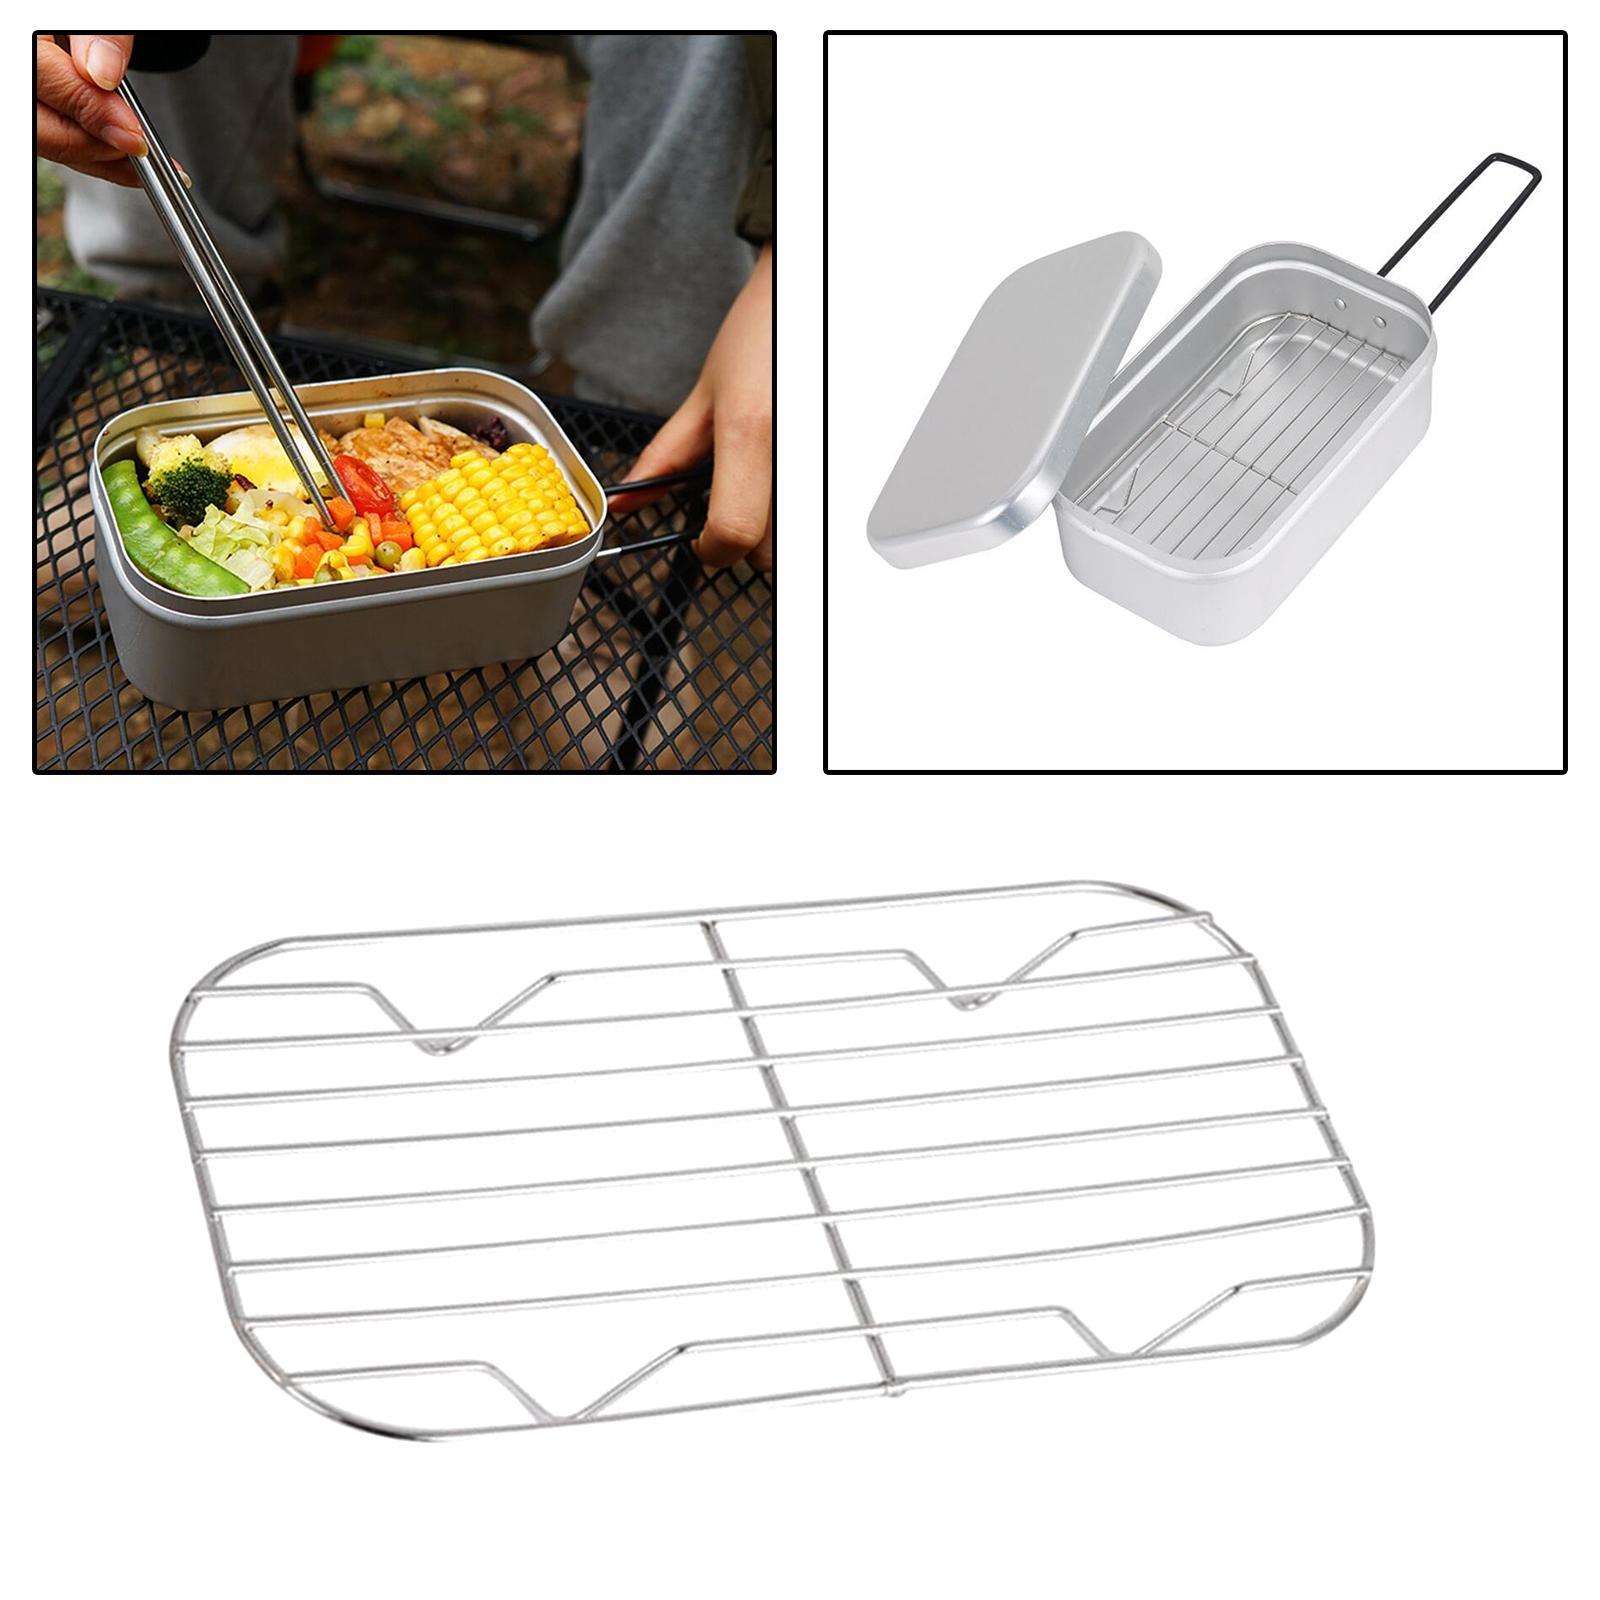 Outdoor Bento Lunch Box Steaming Rack Food Container Cooking Steaming Rack